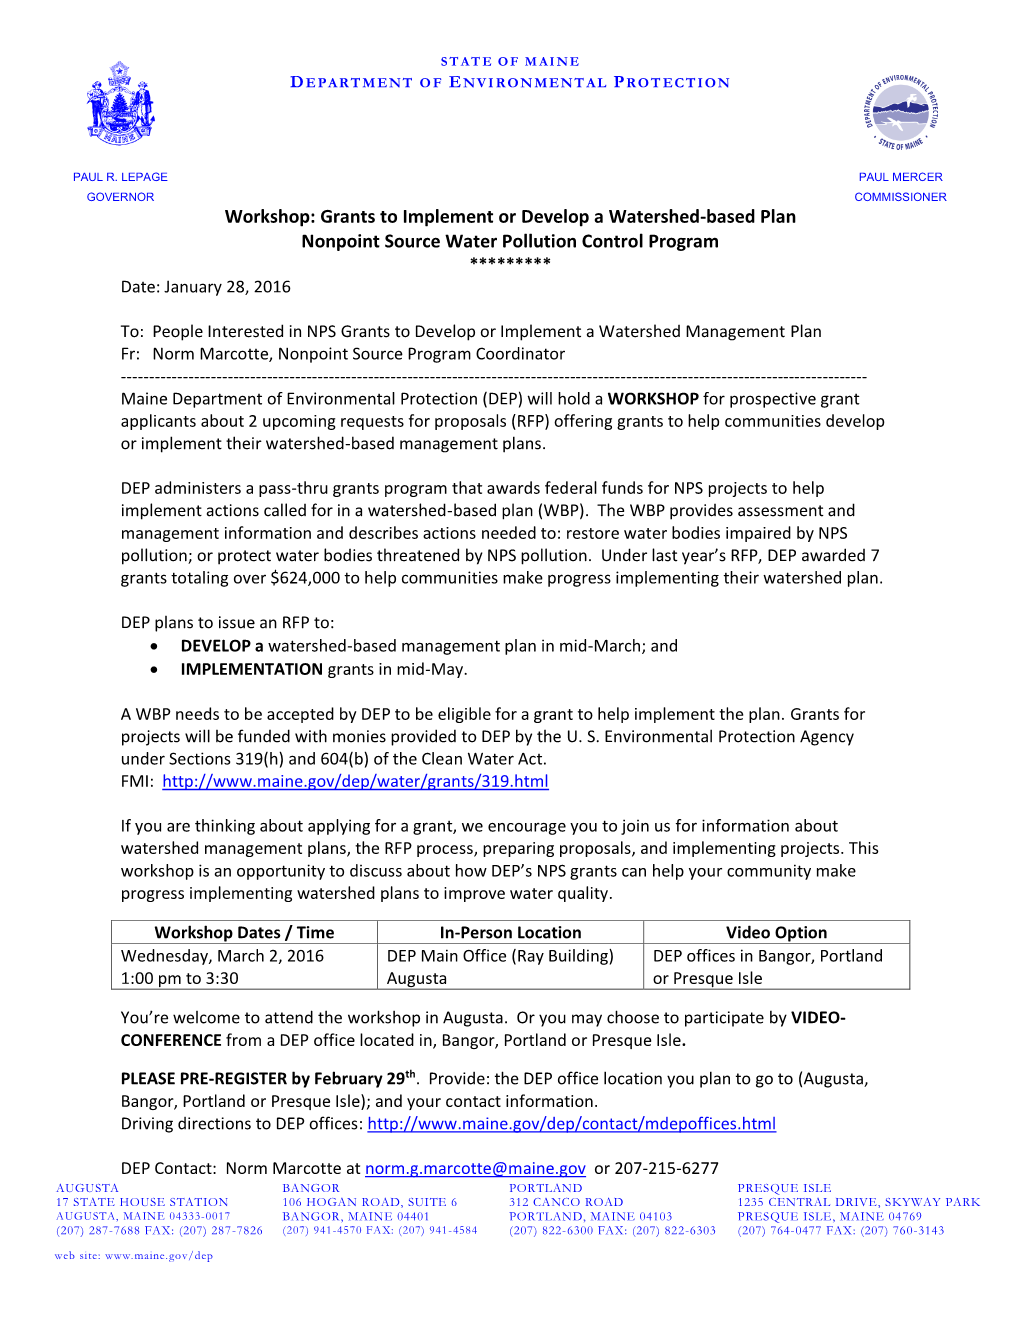 Workshop: Grants to Implement Or Develop a Watershed-Based Plan Nonpoint Source Water Pollution Control Program ********* Date: January 28, 2016